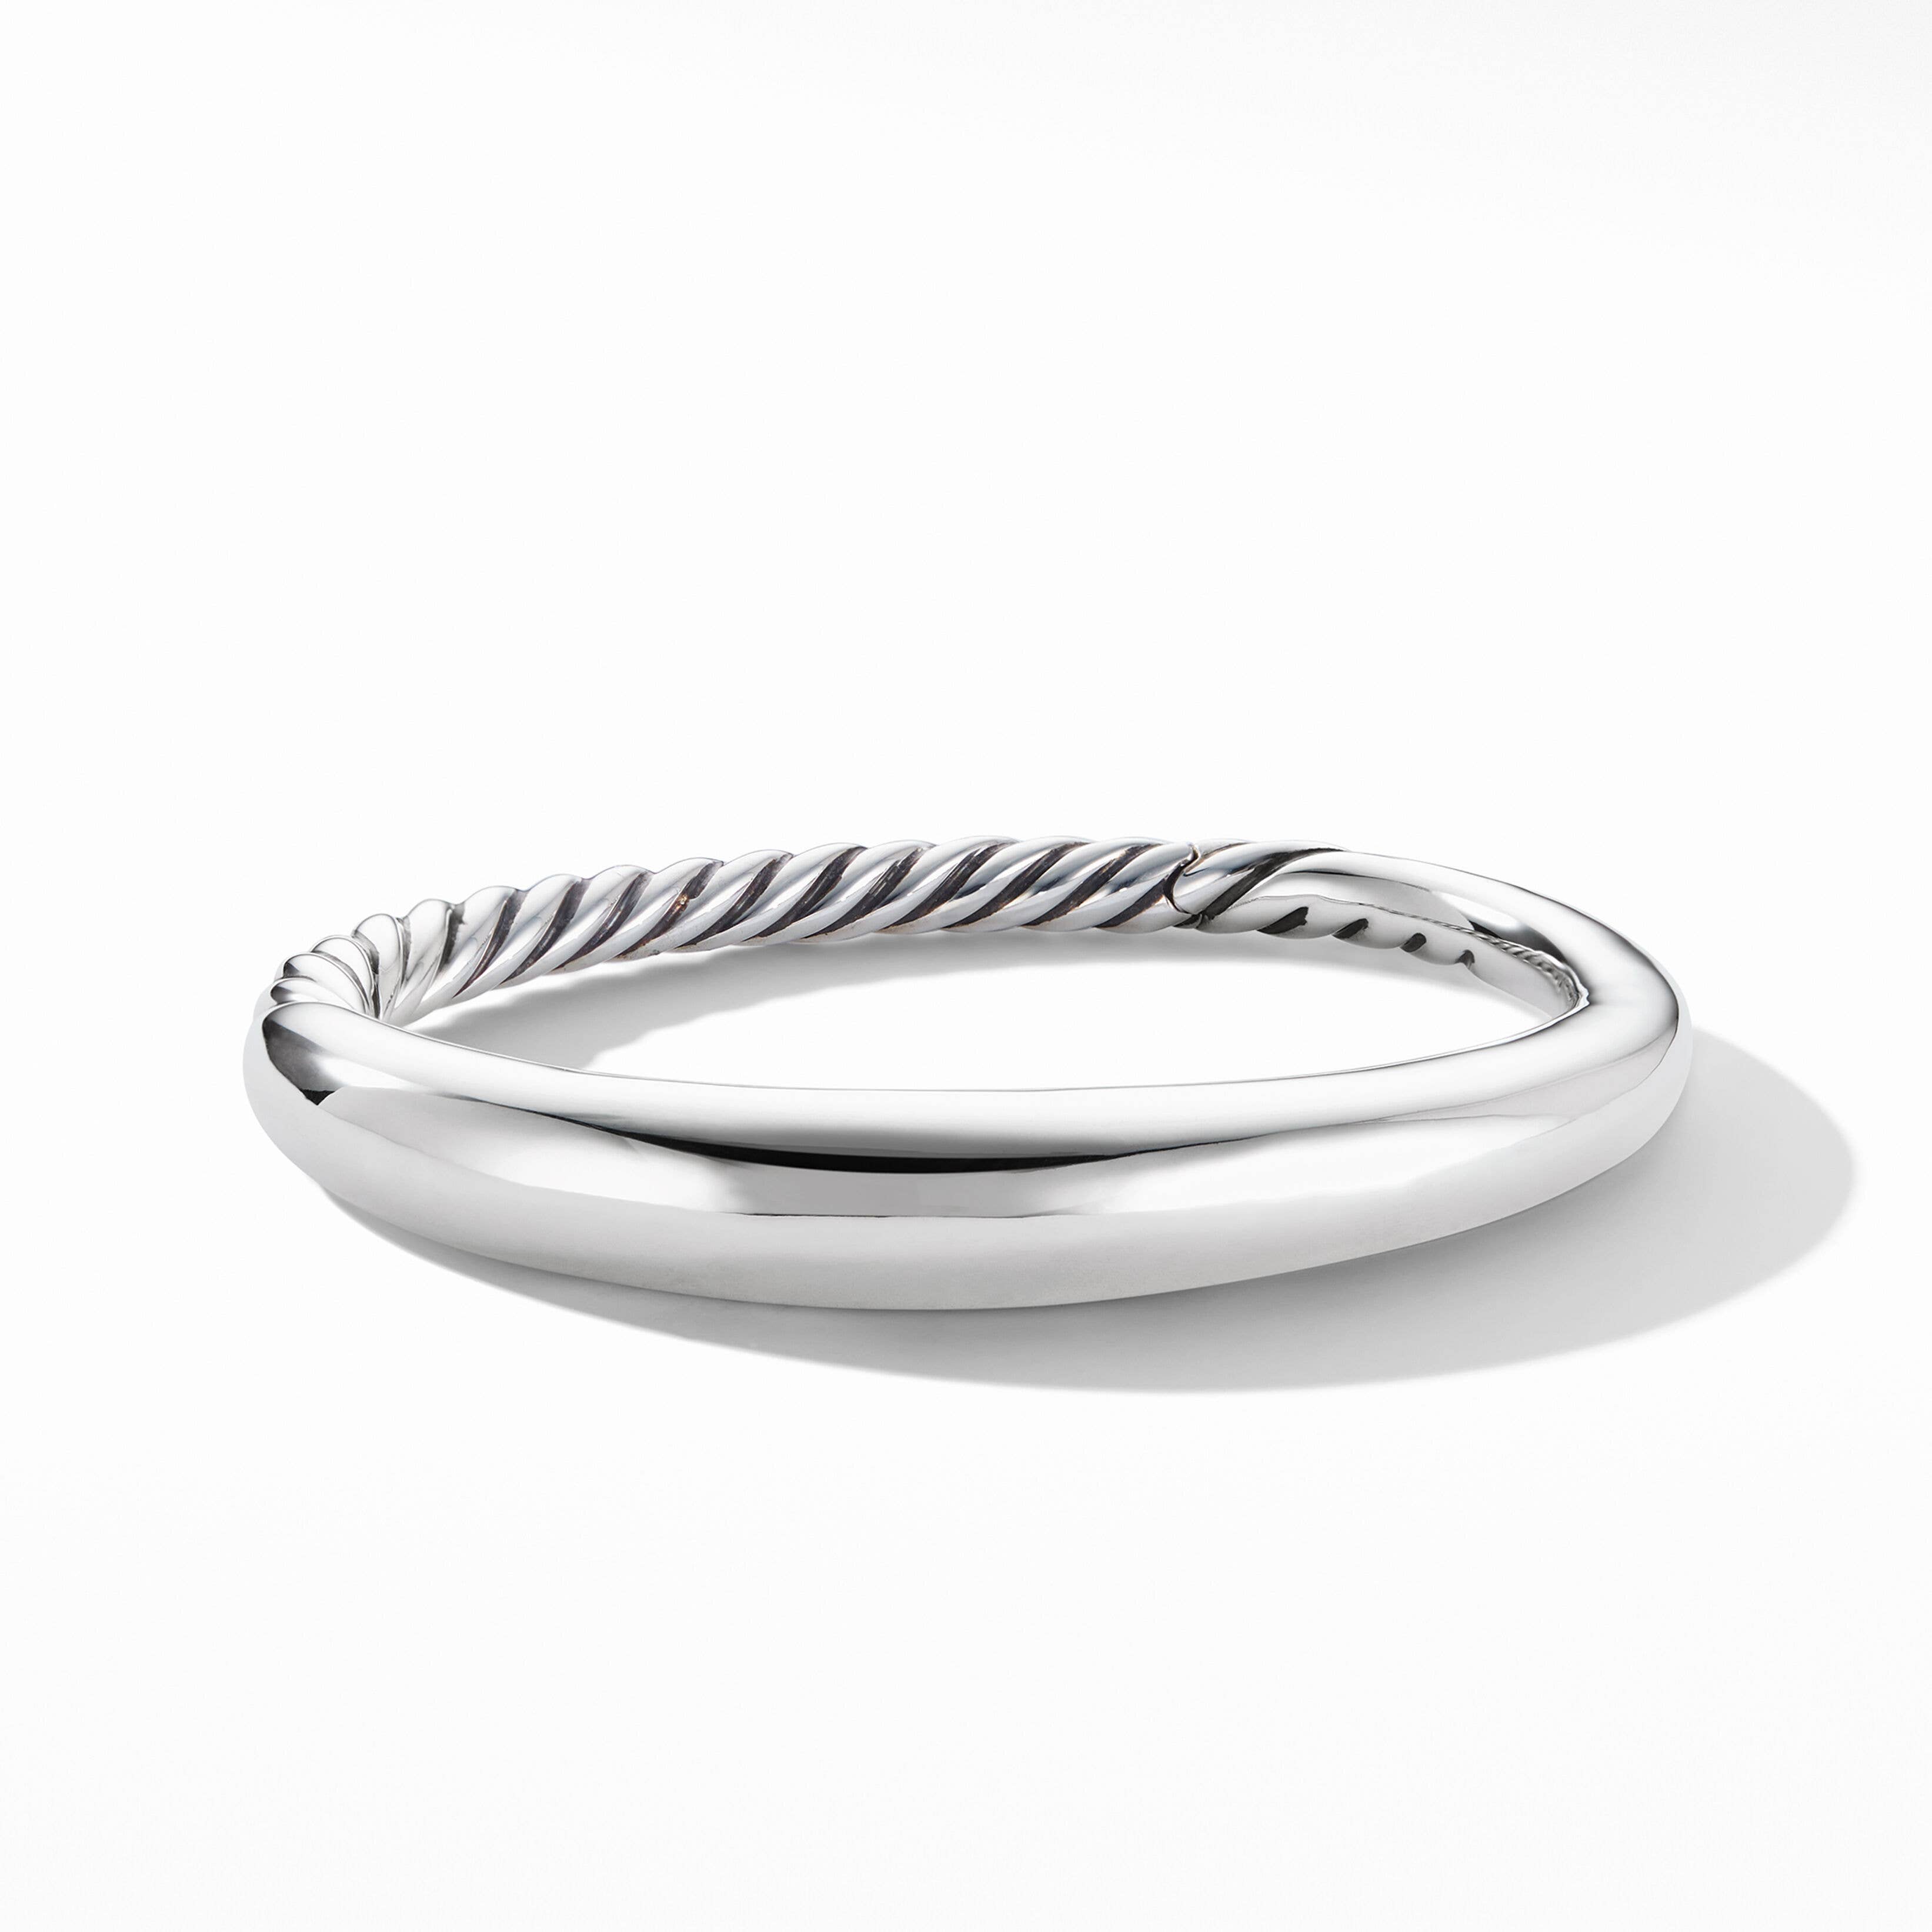 Pure Form® Smooth Bracelet in Sterling Silver